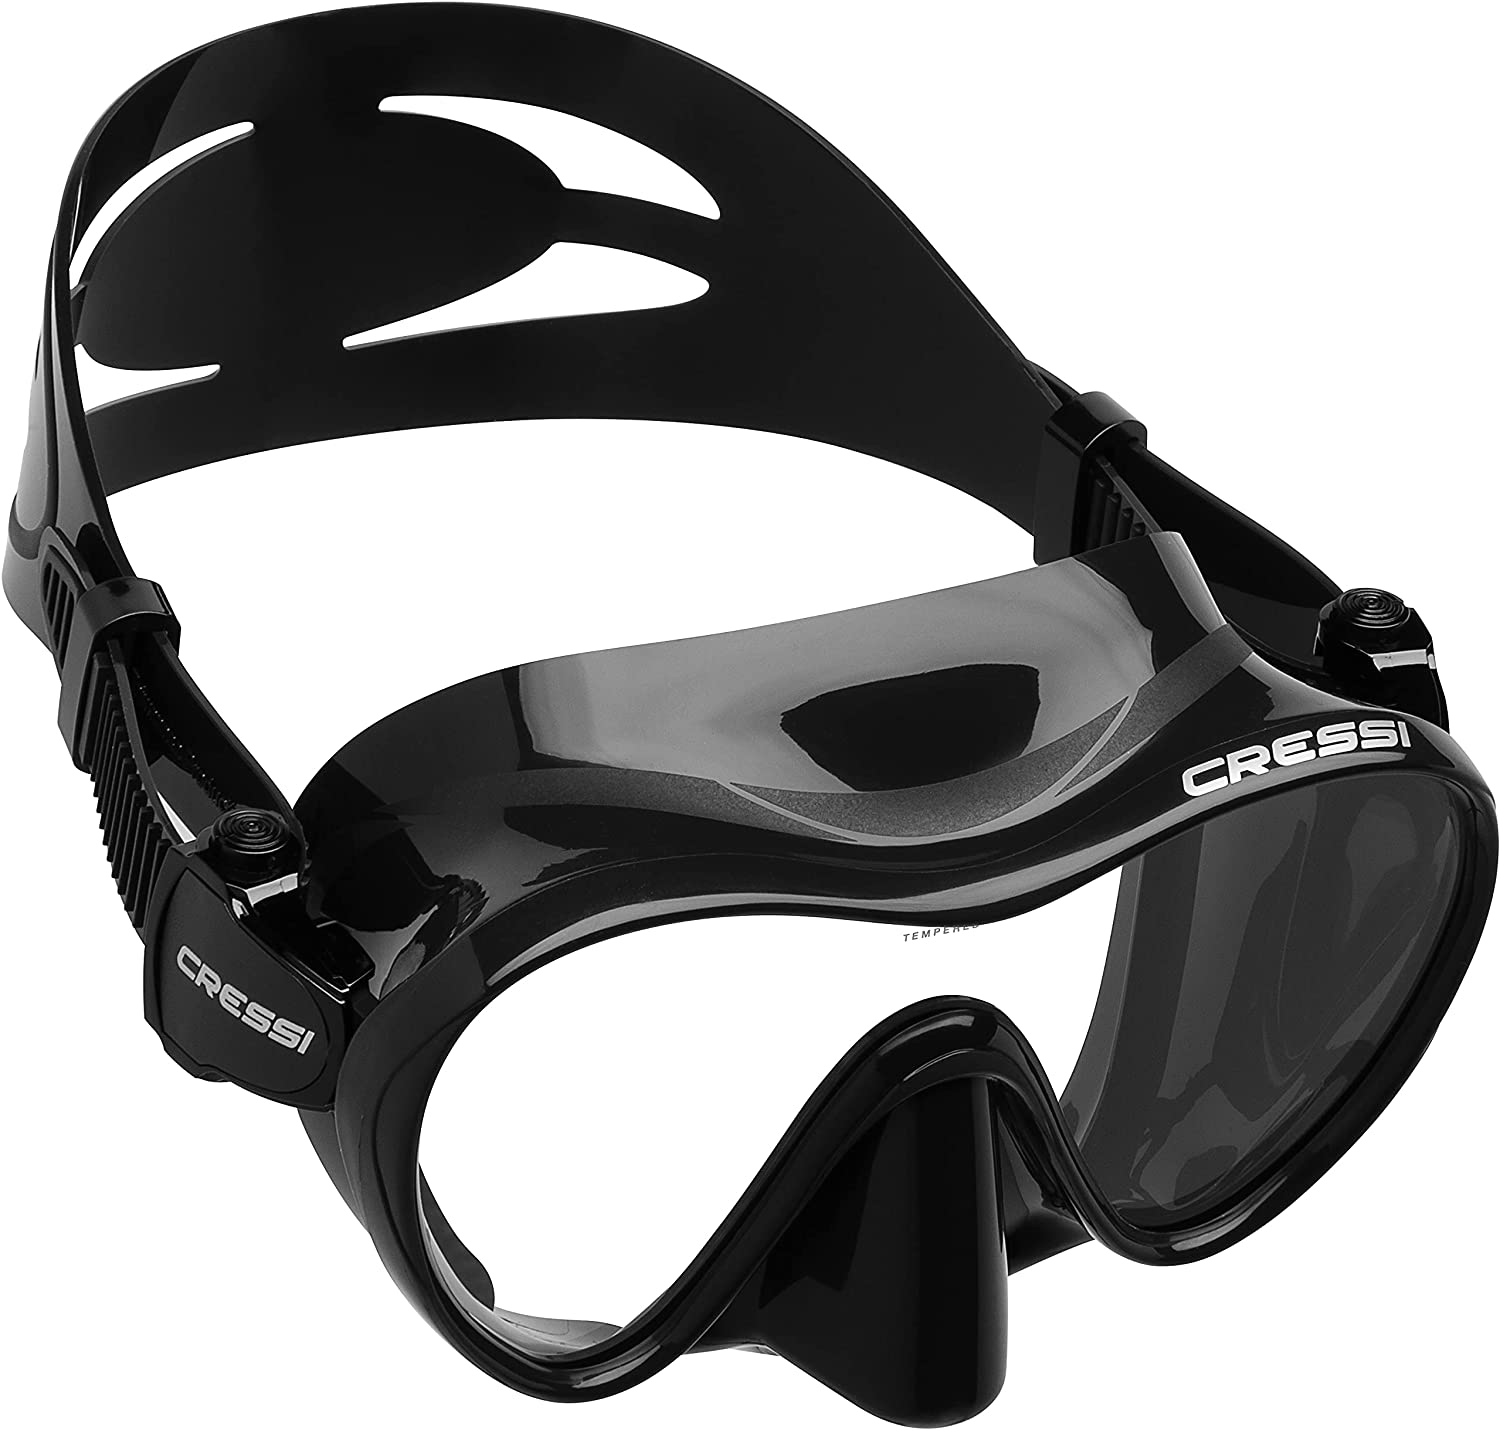 Cressi F1 Mask Review